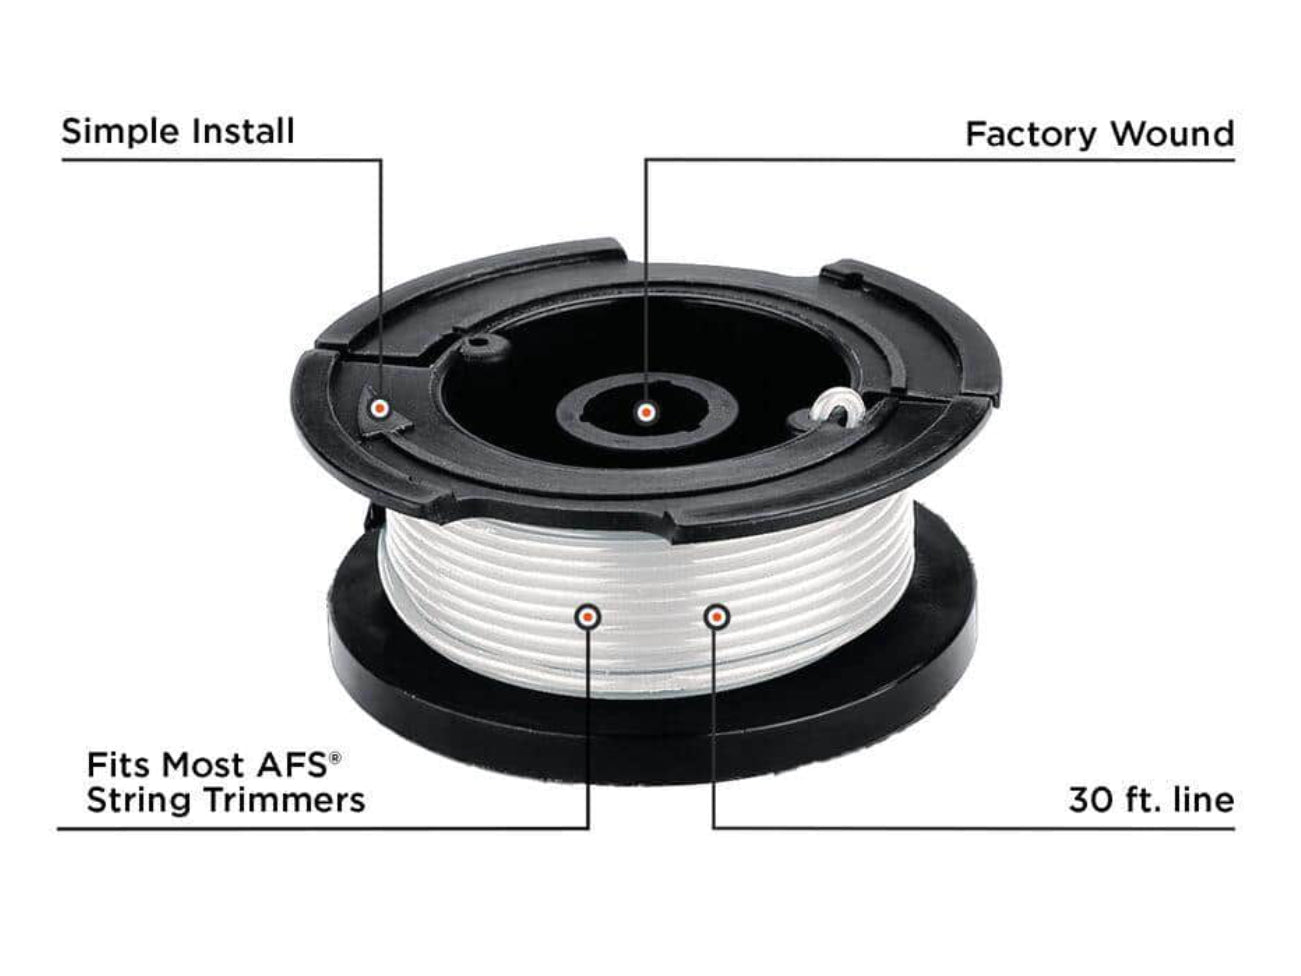 BLACK+DECKER 0.065 in. x 30 ft. Replacement Single Line Automatic Feed Spool AFS for Electric String Grass Trimmer/Lawn Edger/Mower